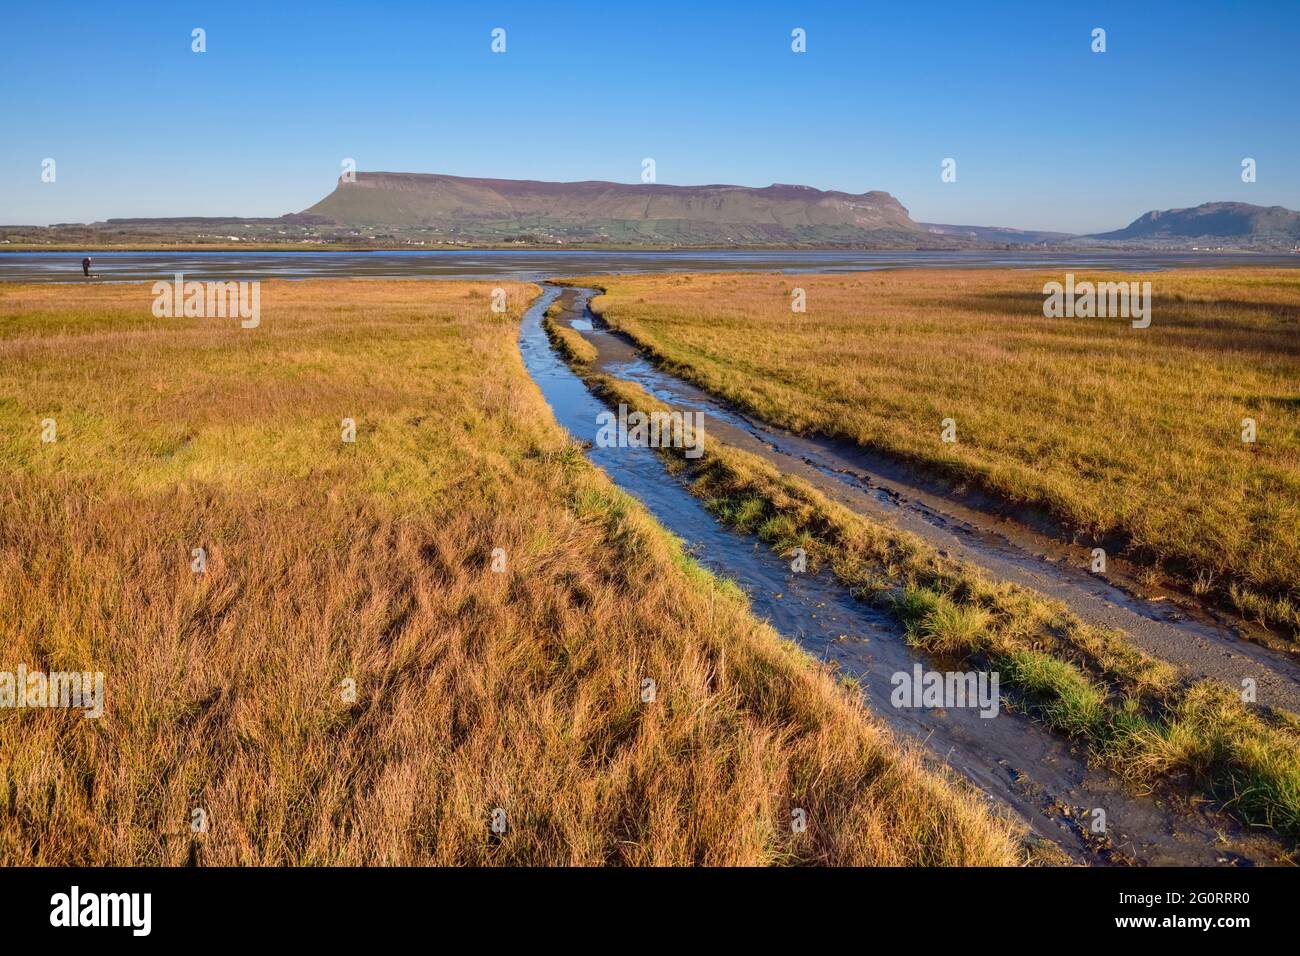 Ireland, County Sligo, Ben Bulben mountain with Rosses Point 3rd beach in the foreground on a clear winters day. Stock Photo